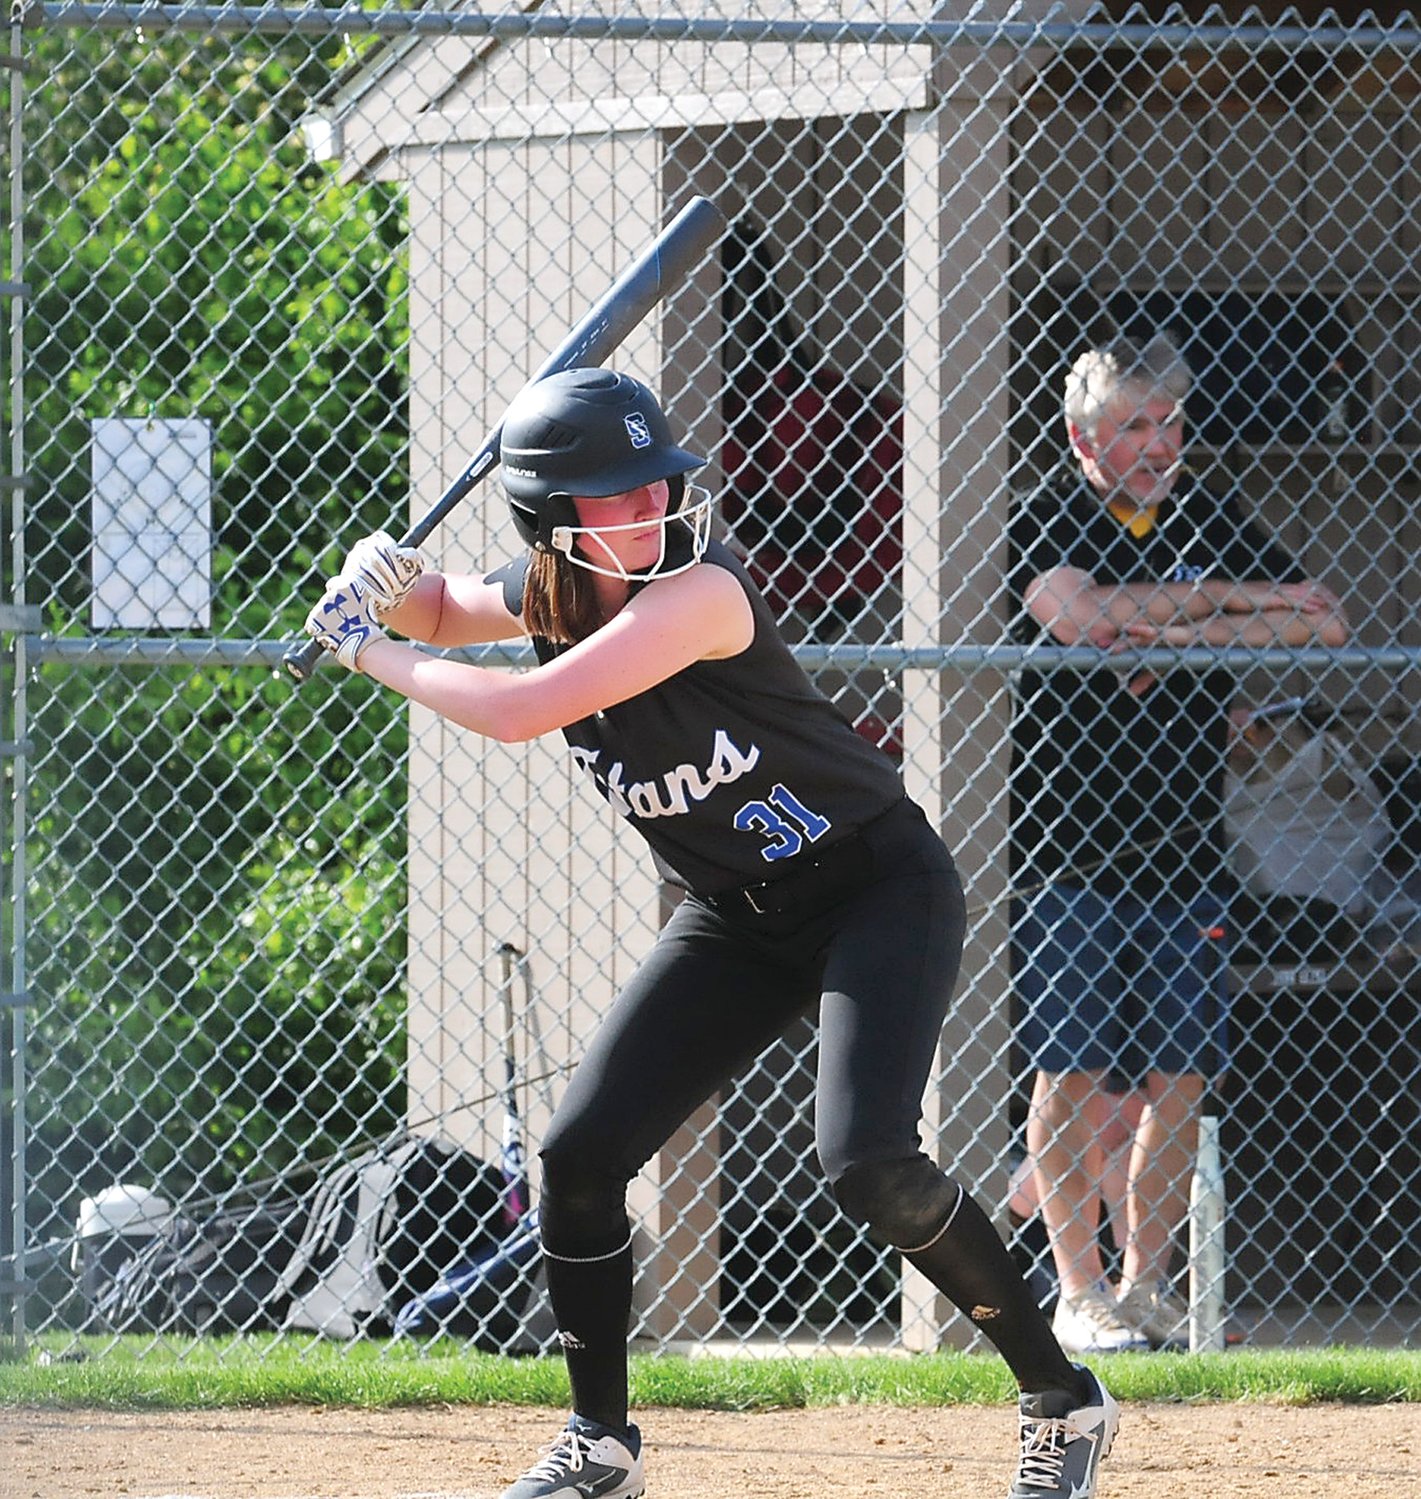 CB South junior Tara Tumasz hit a two-run single in the fourth inning to break Monday’s District One Class 6A softball playoff game open. The Titans went on to triumph over Pennridge, 8-2, to advance to round two. Photograph by Steve Sherman.